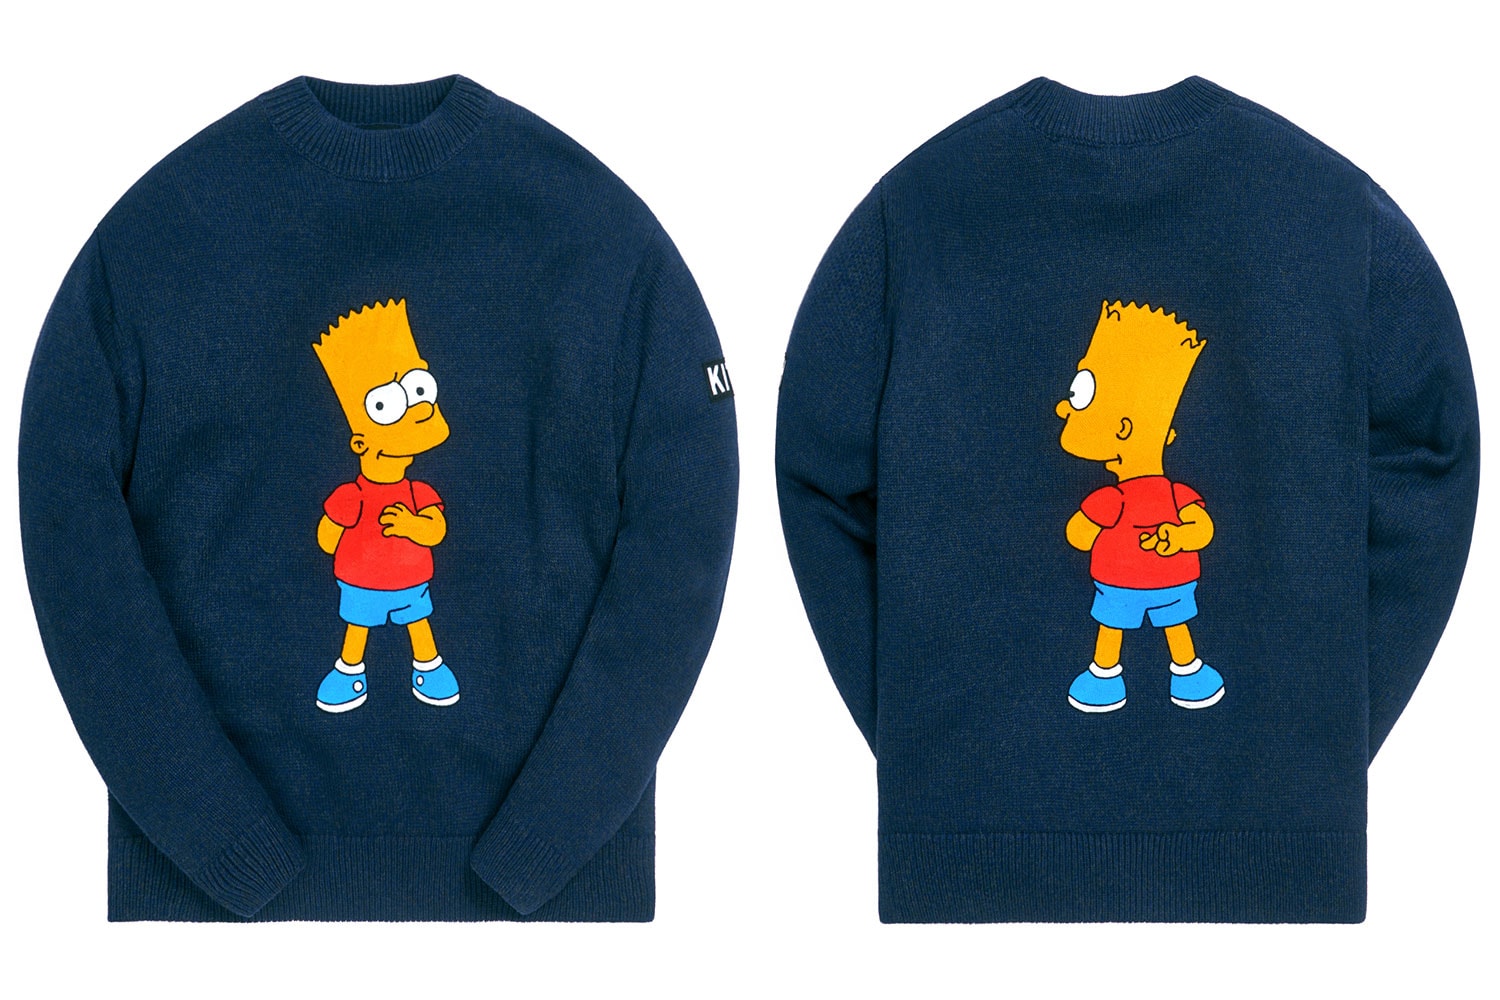 KITH が『ザ・シンプソンズ』とのコラボピースをリリース The Simpsons KITH Collection Release SoHo Installation Treats Doughnut Plant Info